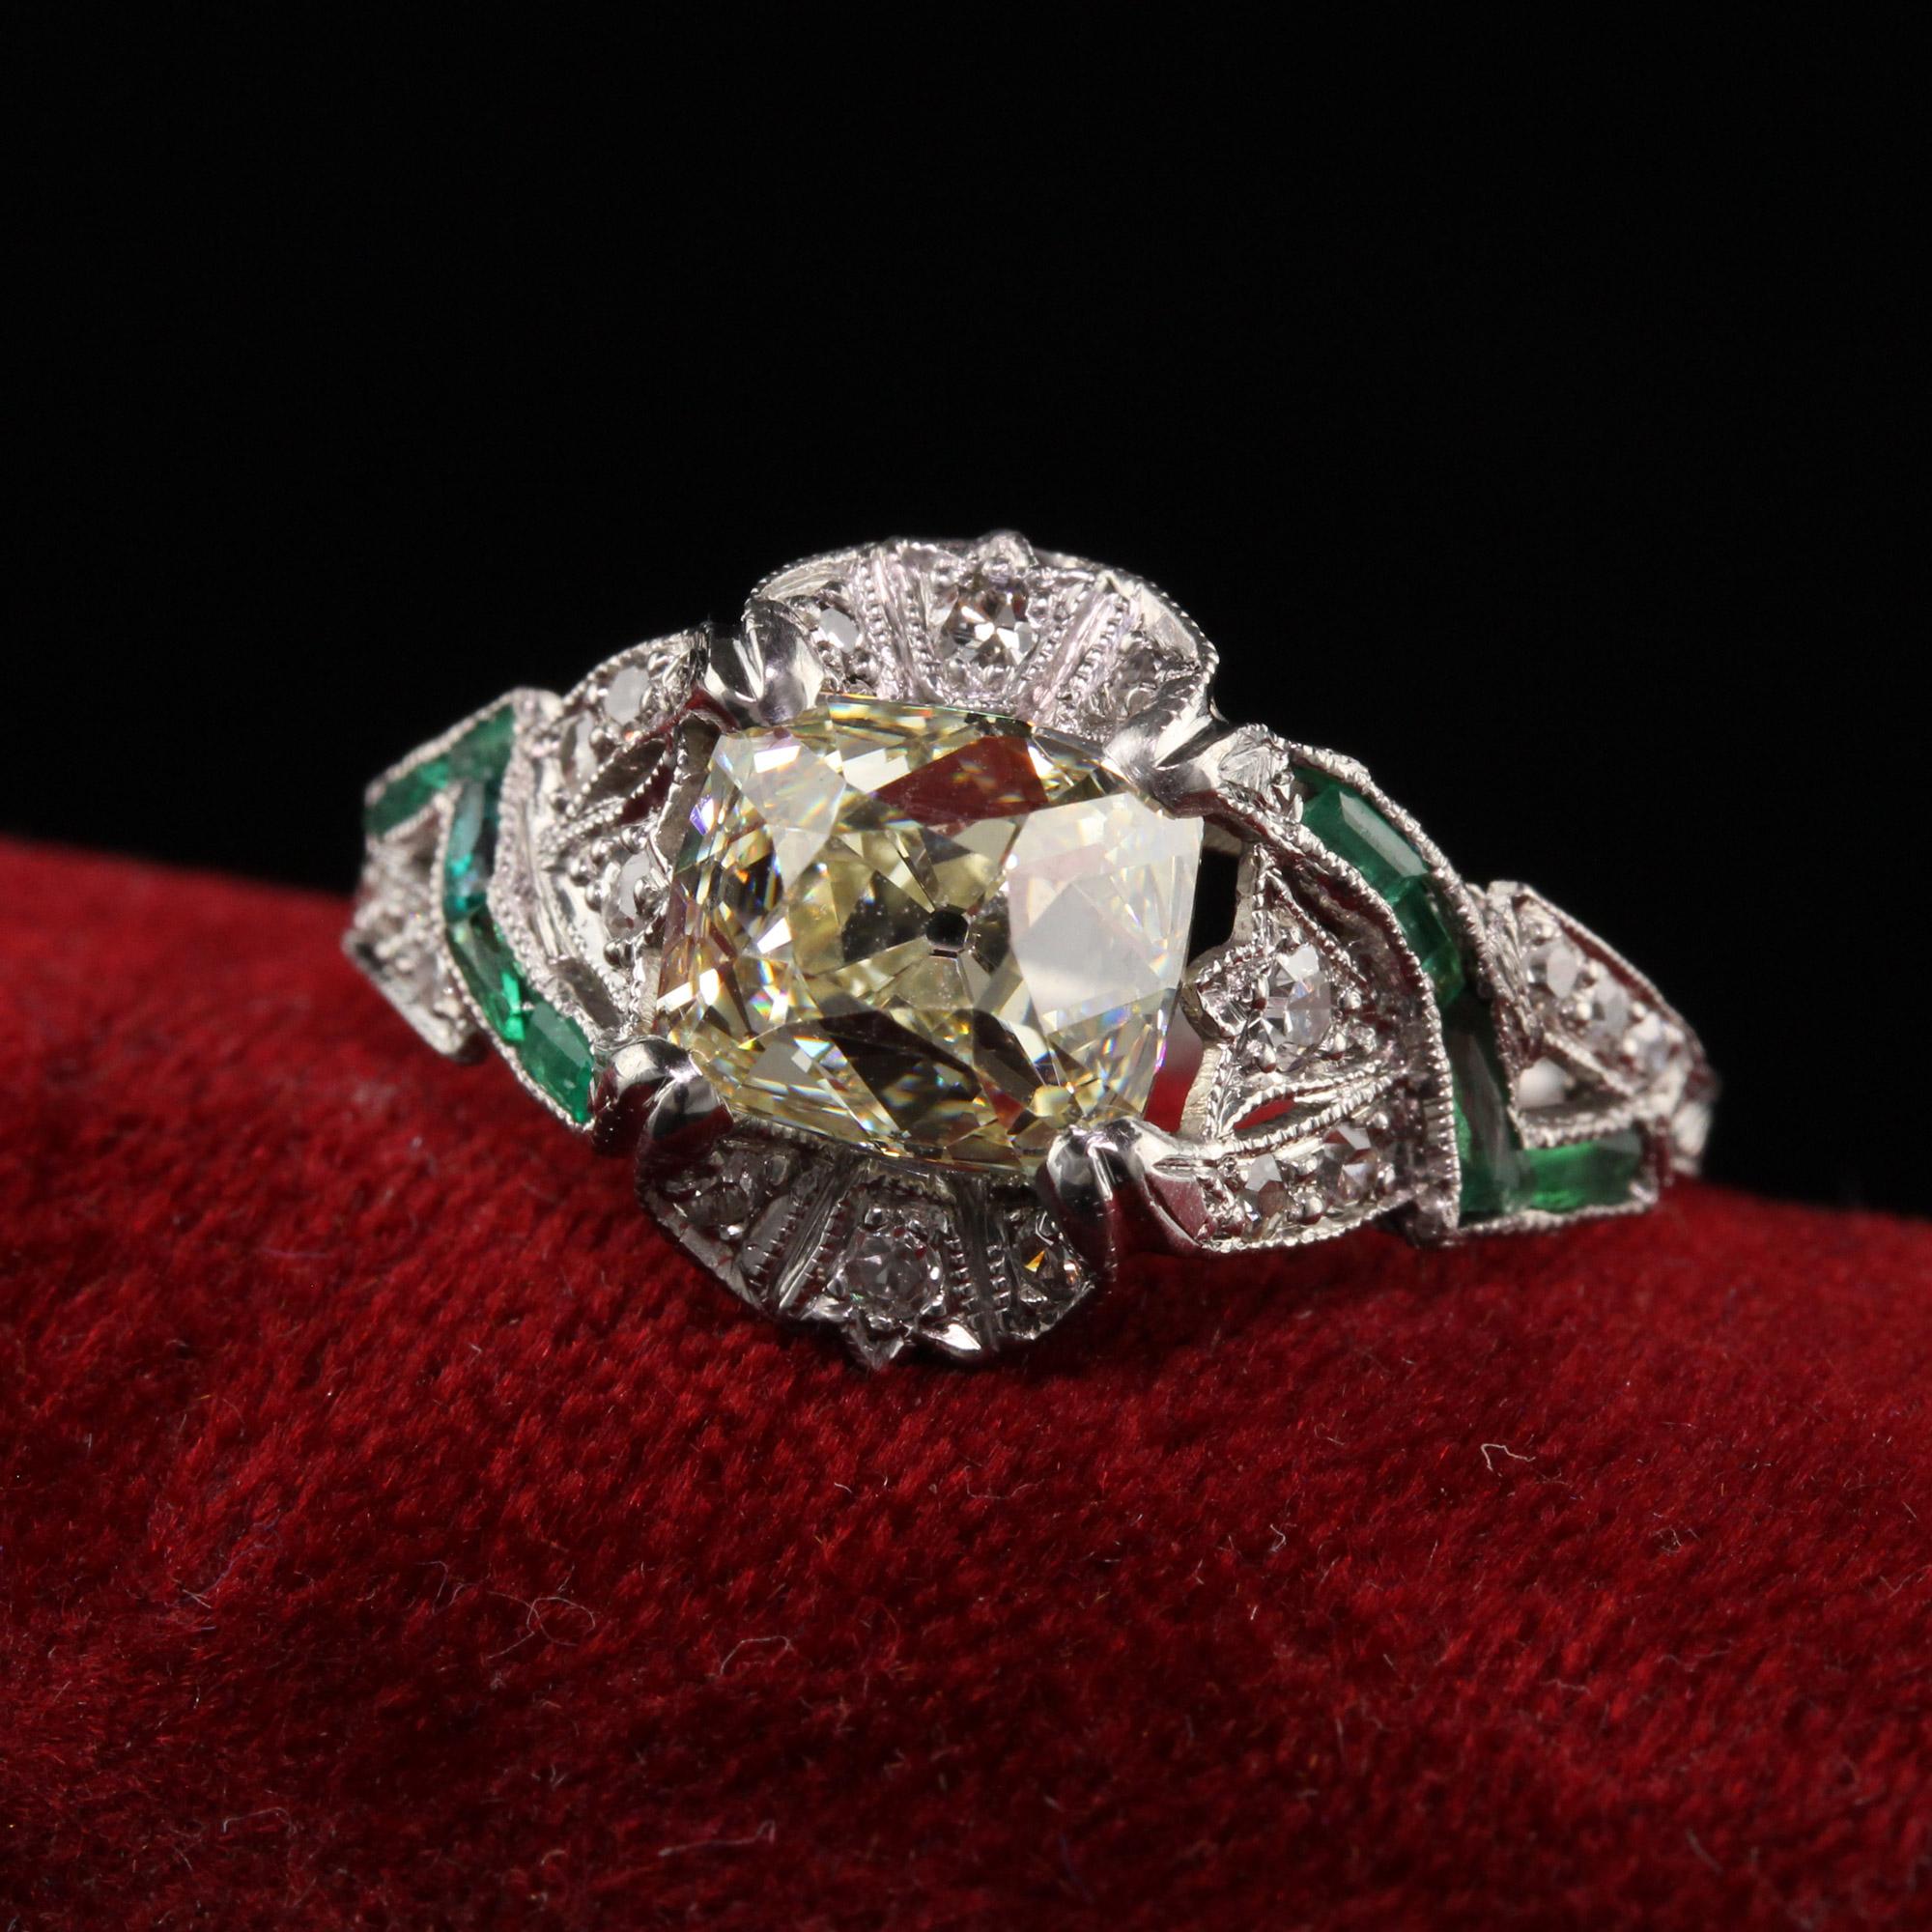 Beautiful Antique Art Deco Platinum Old Mine Cut Diamond Emerald Engagement Ring. This gorgeous engagement ring is crafted in platinum. The center holds a chunky old mine cut diamond that is set in a gorgeous filigree mounting with single cut